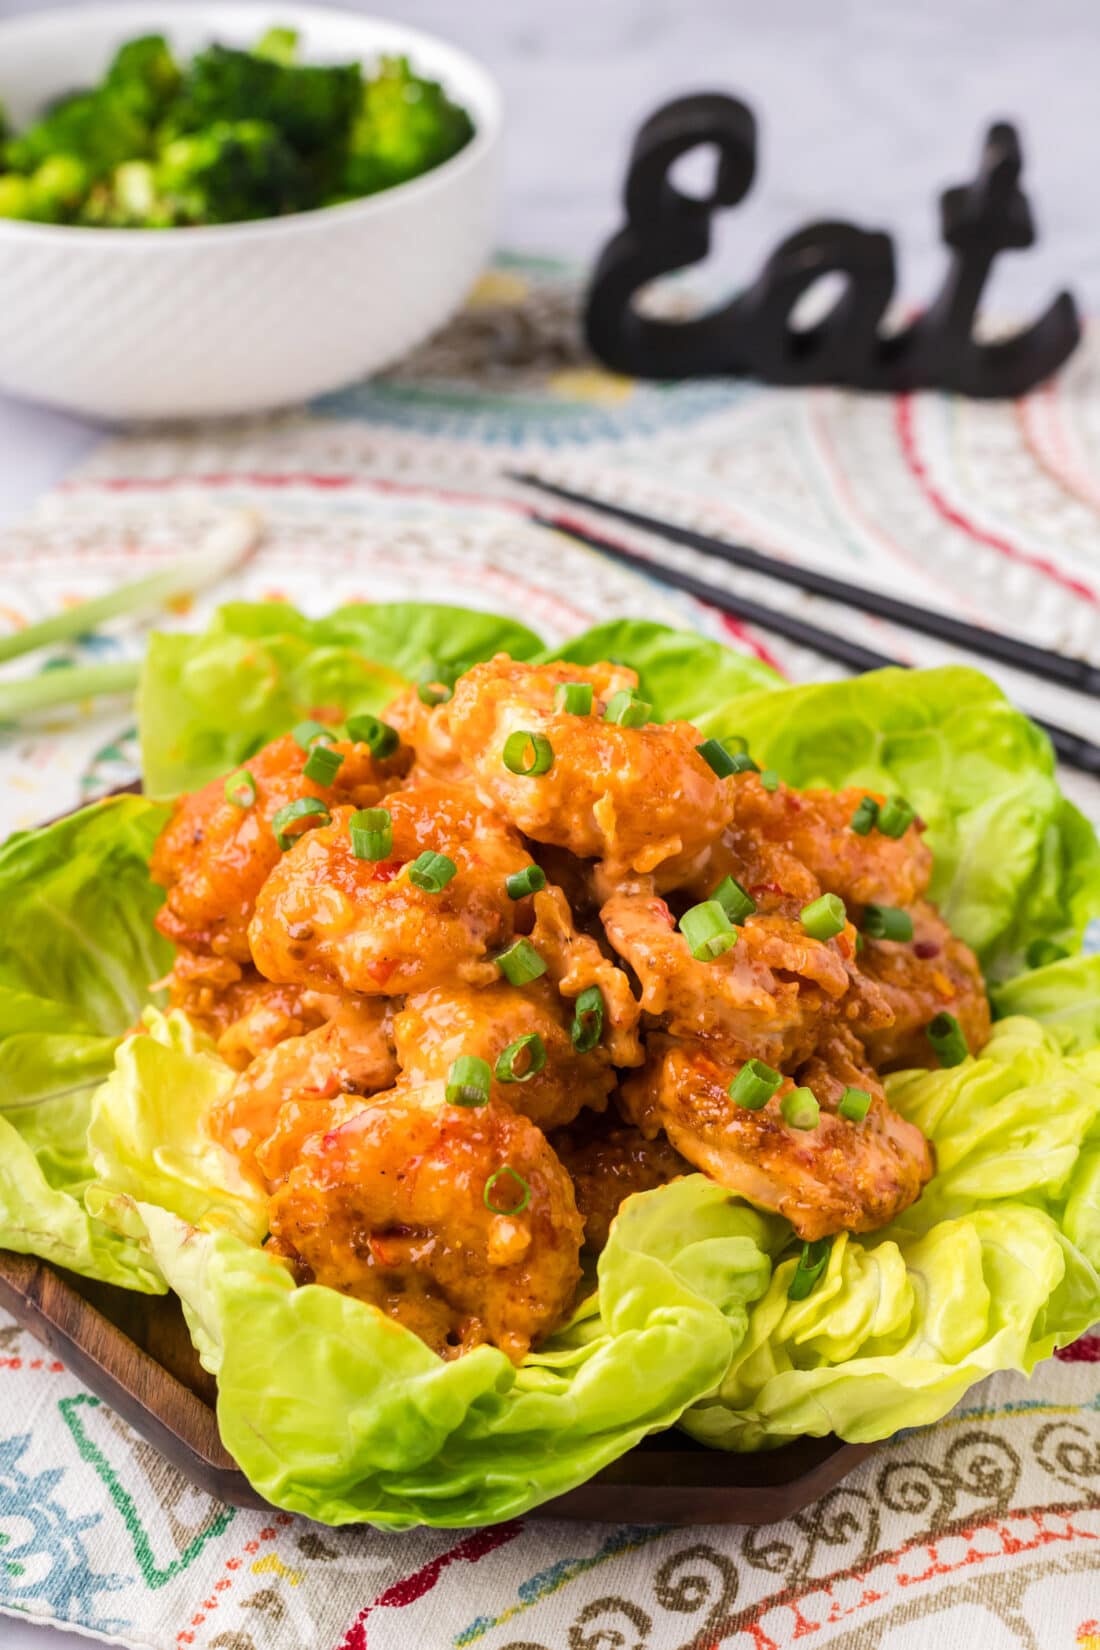 Bang Bang Shrimp on a bed of lettuce with a bowl of broccoli in the background